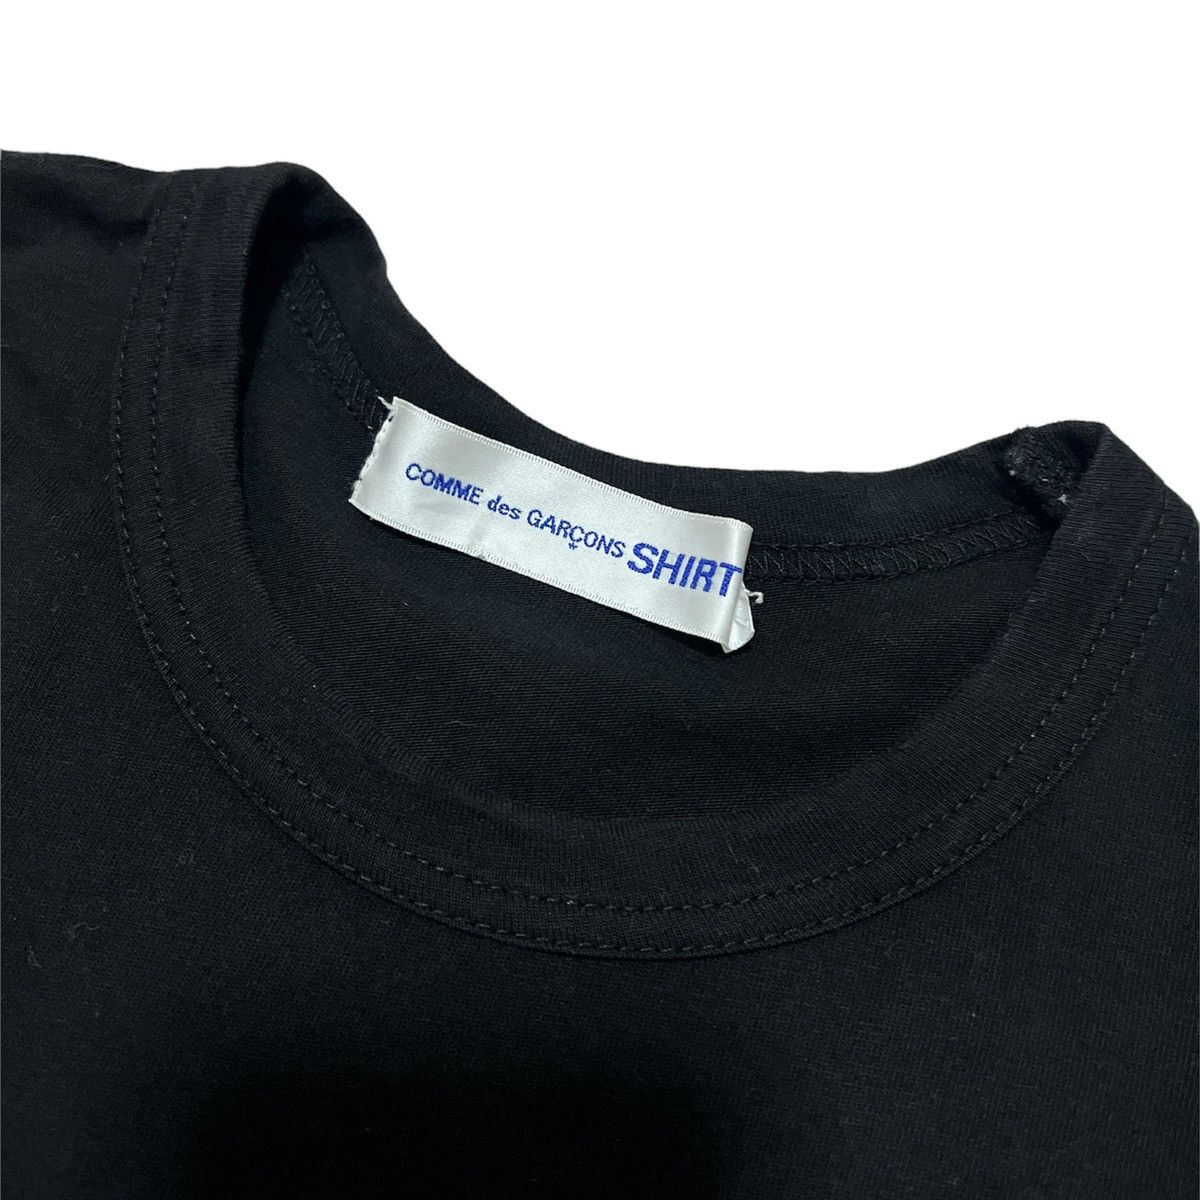 Comme des Garcons Shirt Double Picket Tee - 3